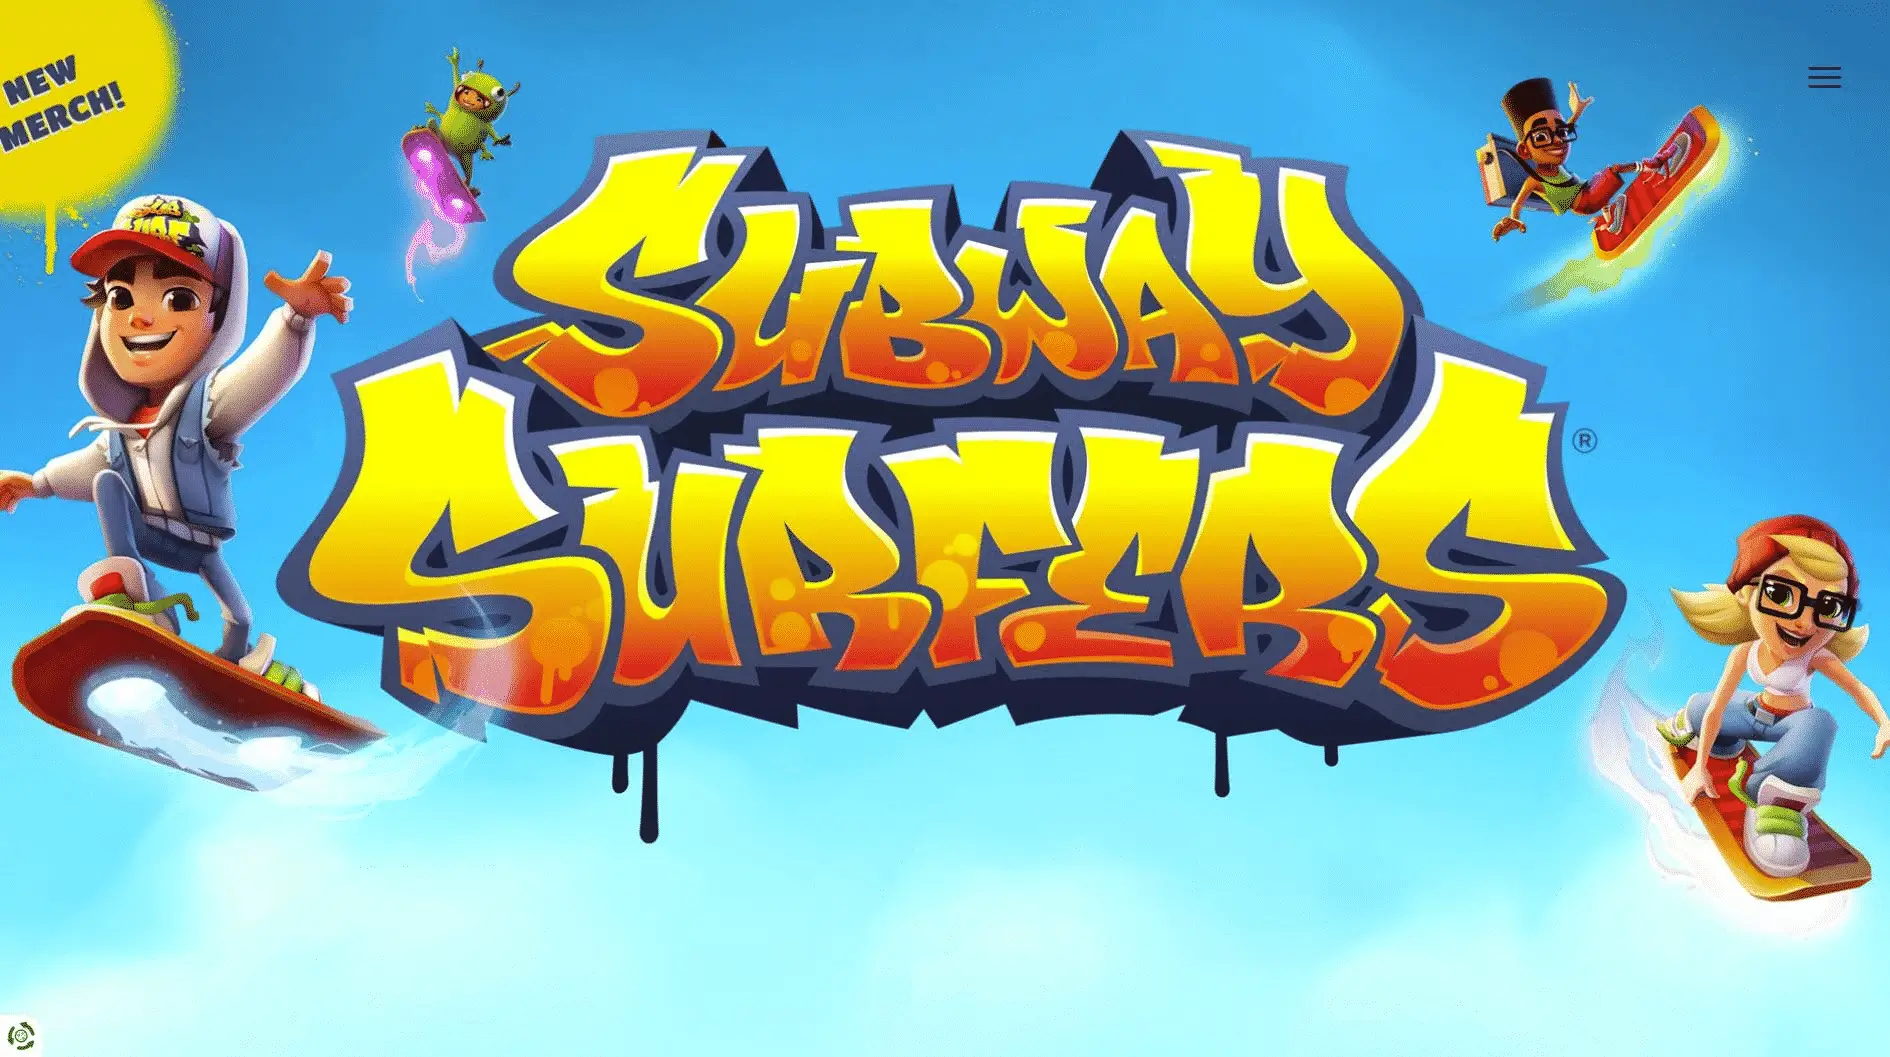 The best cheats for Subway Surfers